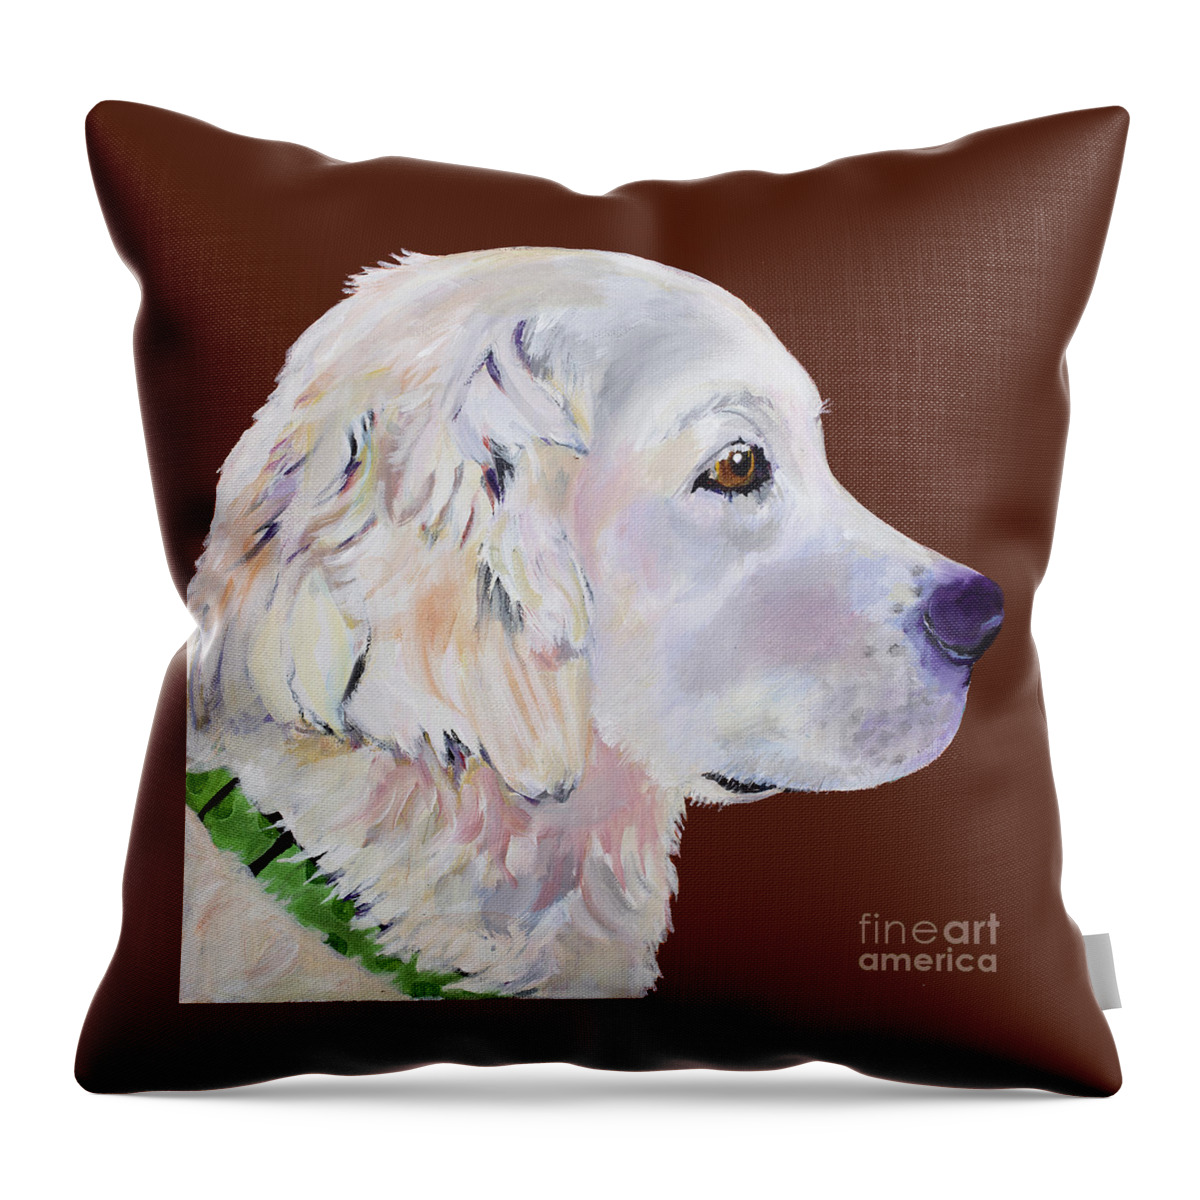 Creamy Golden Retriever Throw Pillow featuring the painting Willard by Pat Saunders-White